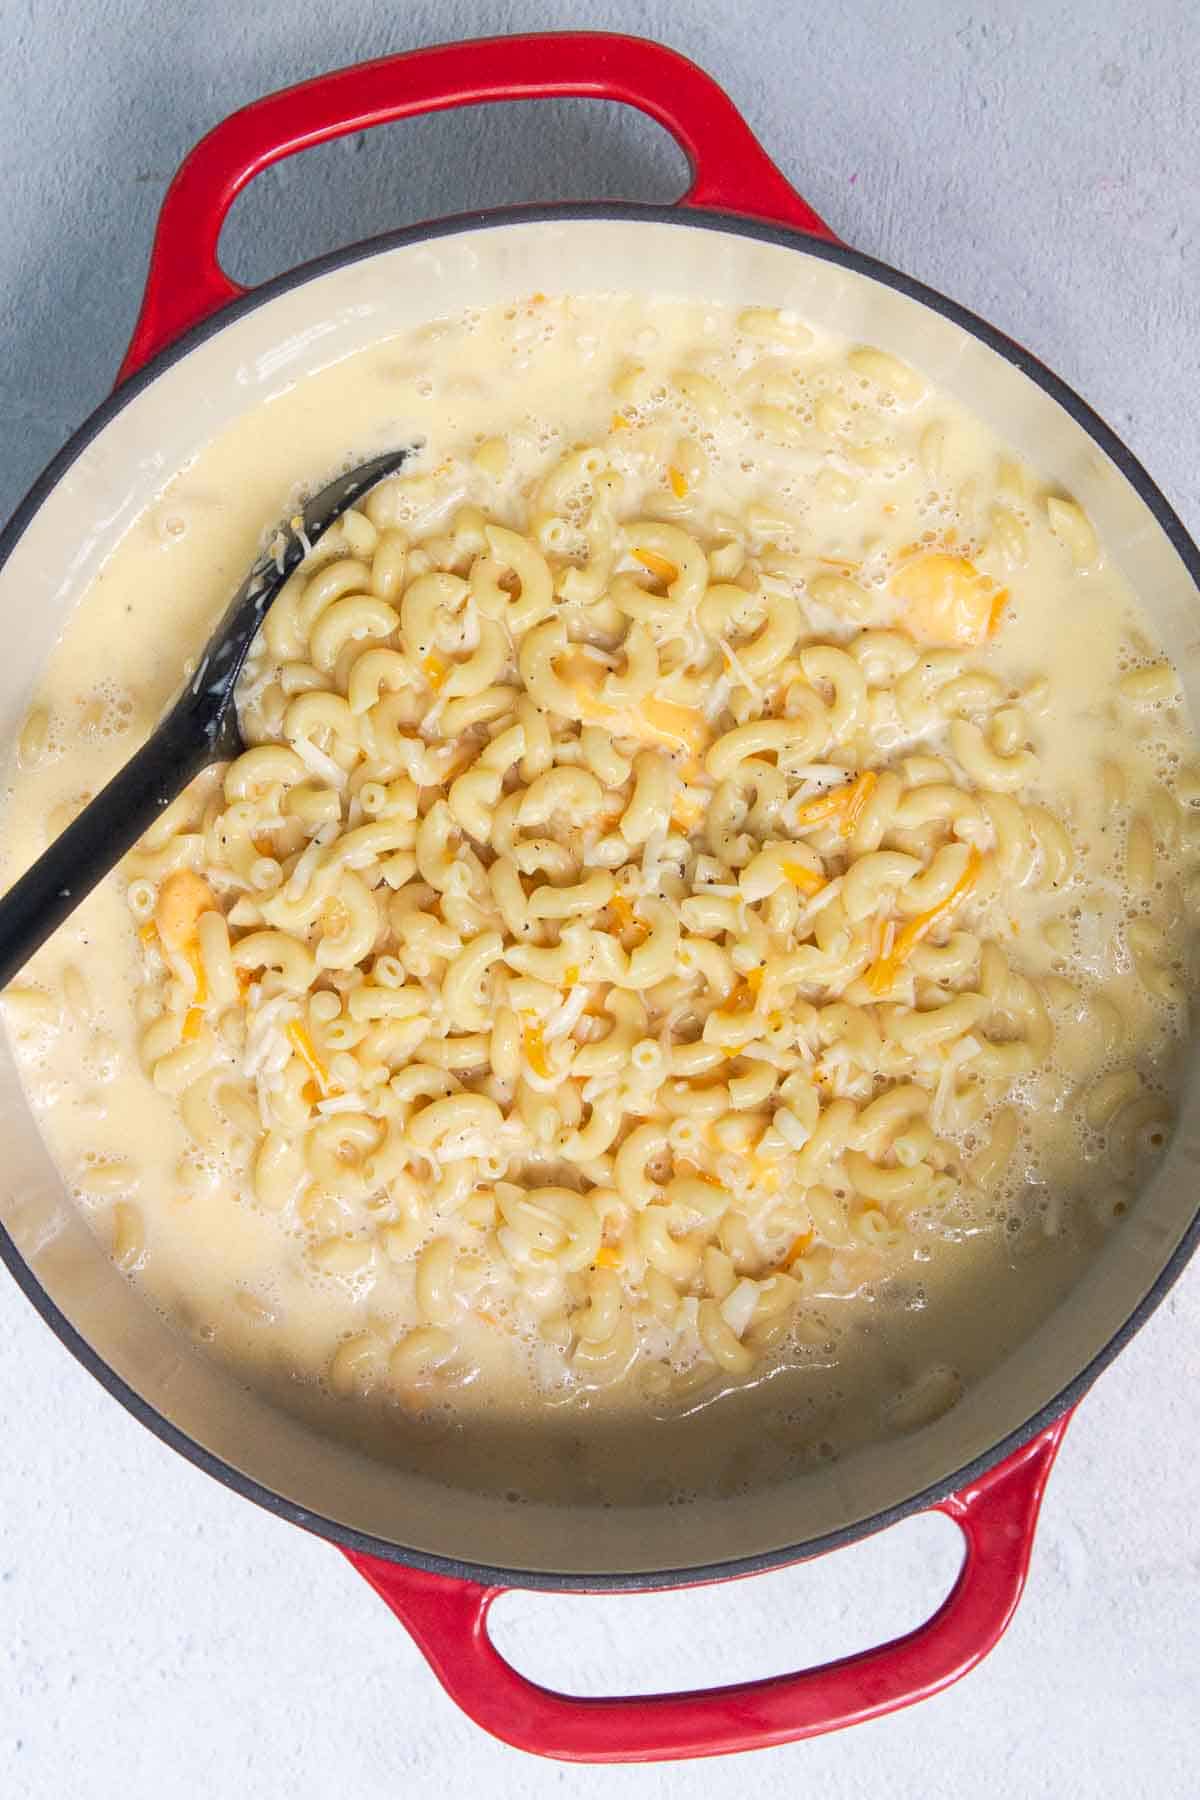 Egg mixture and shredded cheese have been stirred into the cooked elbow macaroni